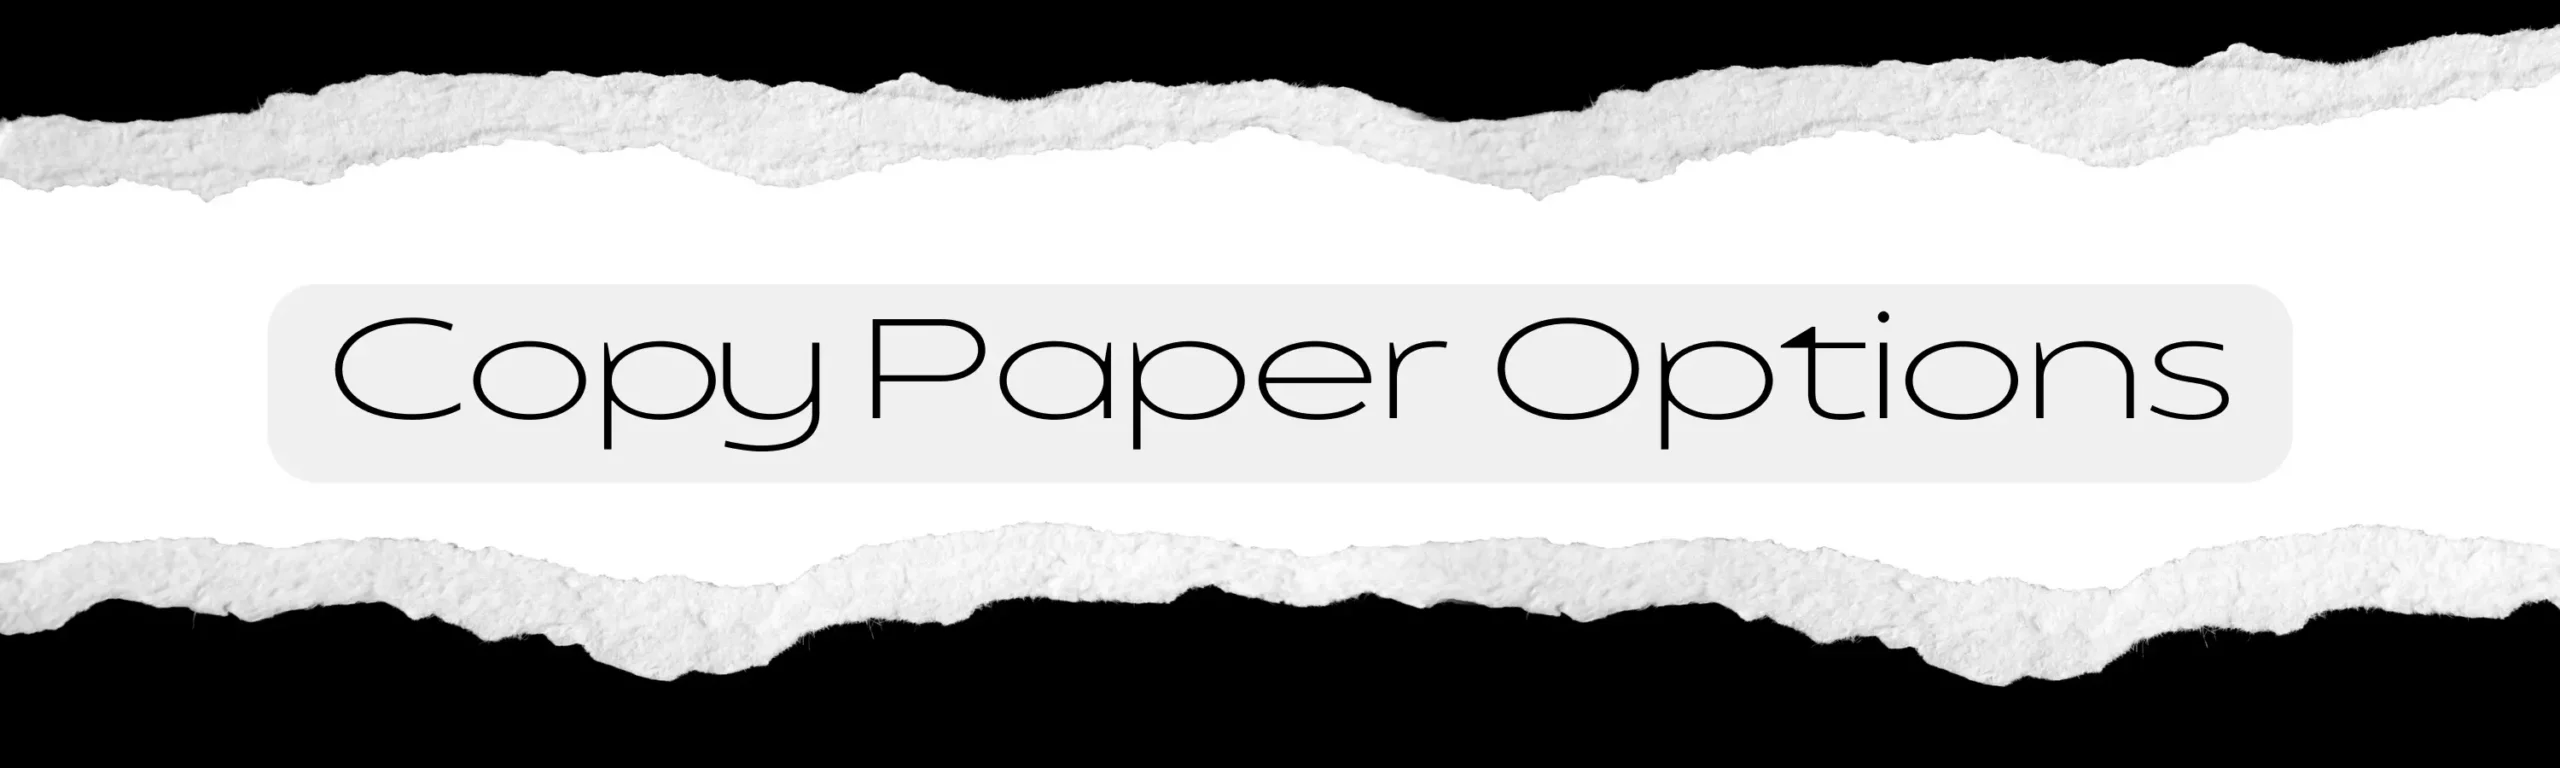 Copy Paper Options Banners